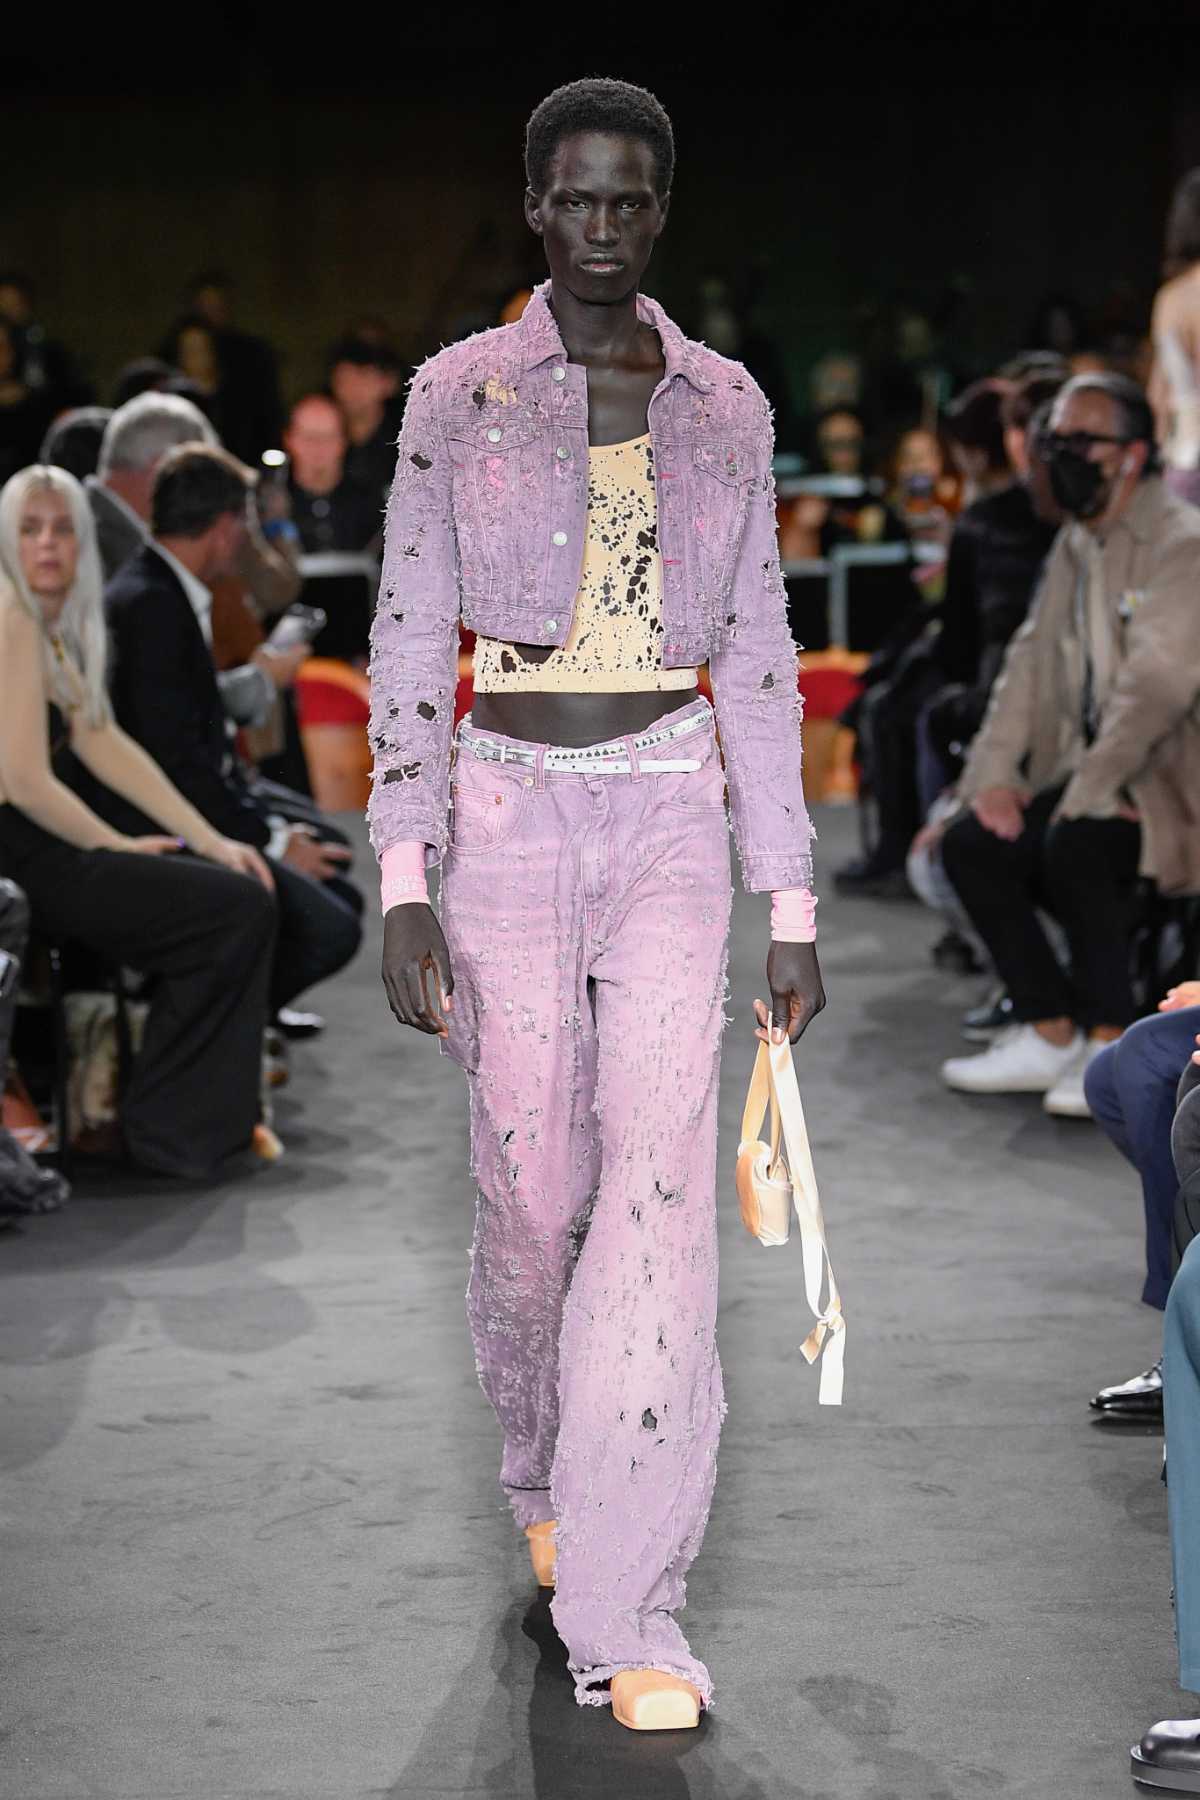 MM6 Maison Margiela Presents Its New Spring-Summer 2023 Collection